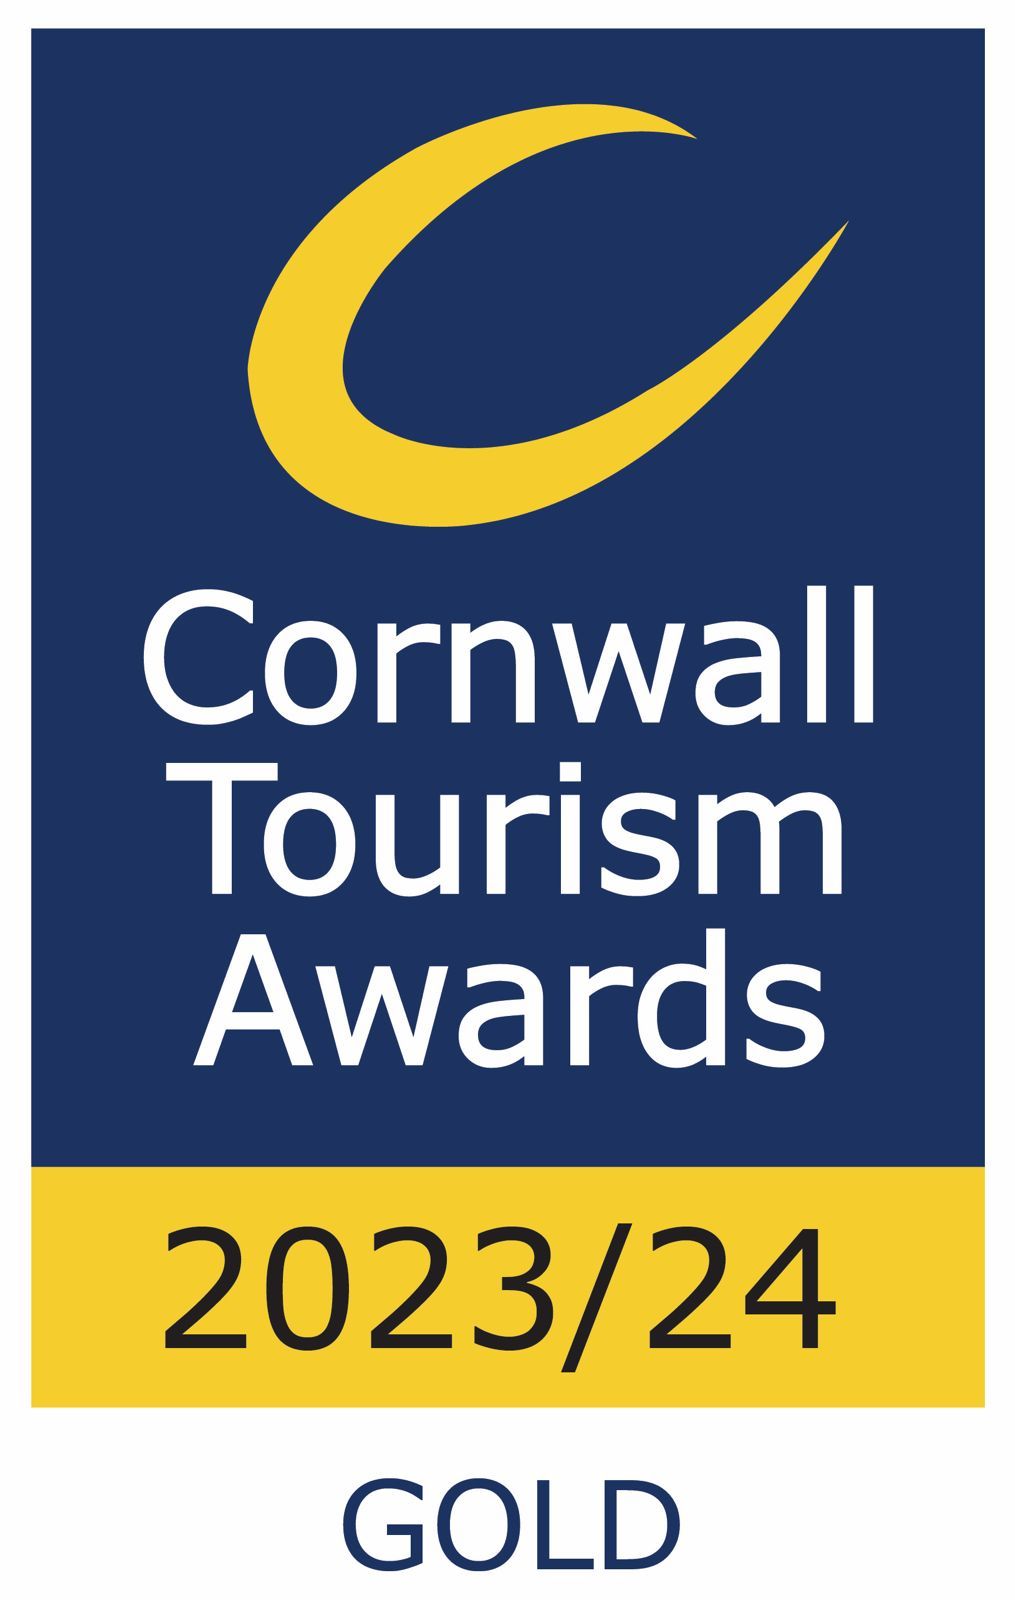 Gold - Cornwall Tourism Awards, Wedding Venue of the Year 2023/2024